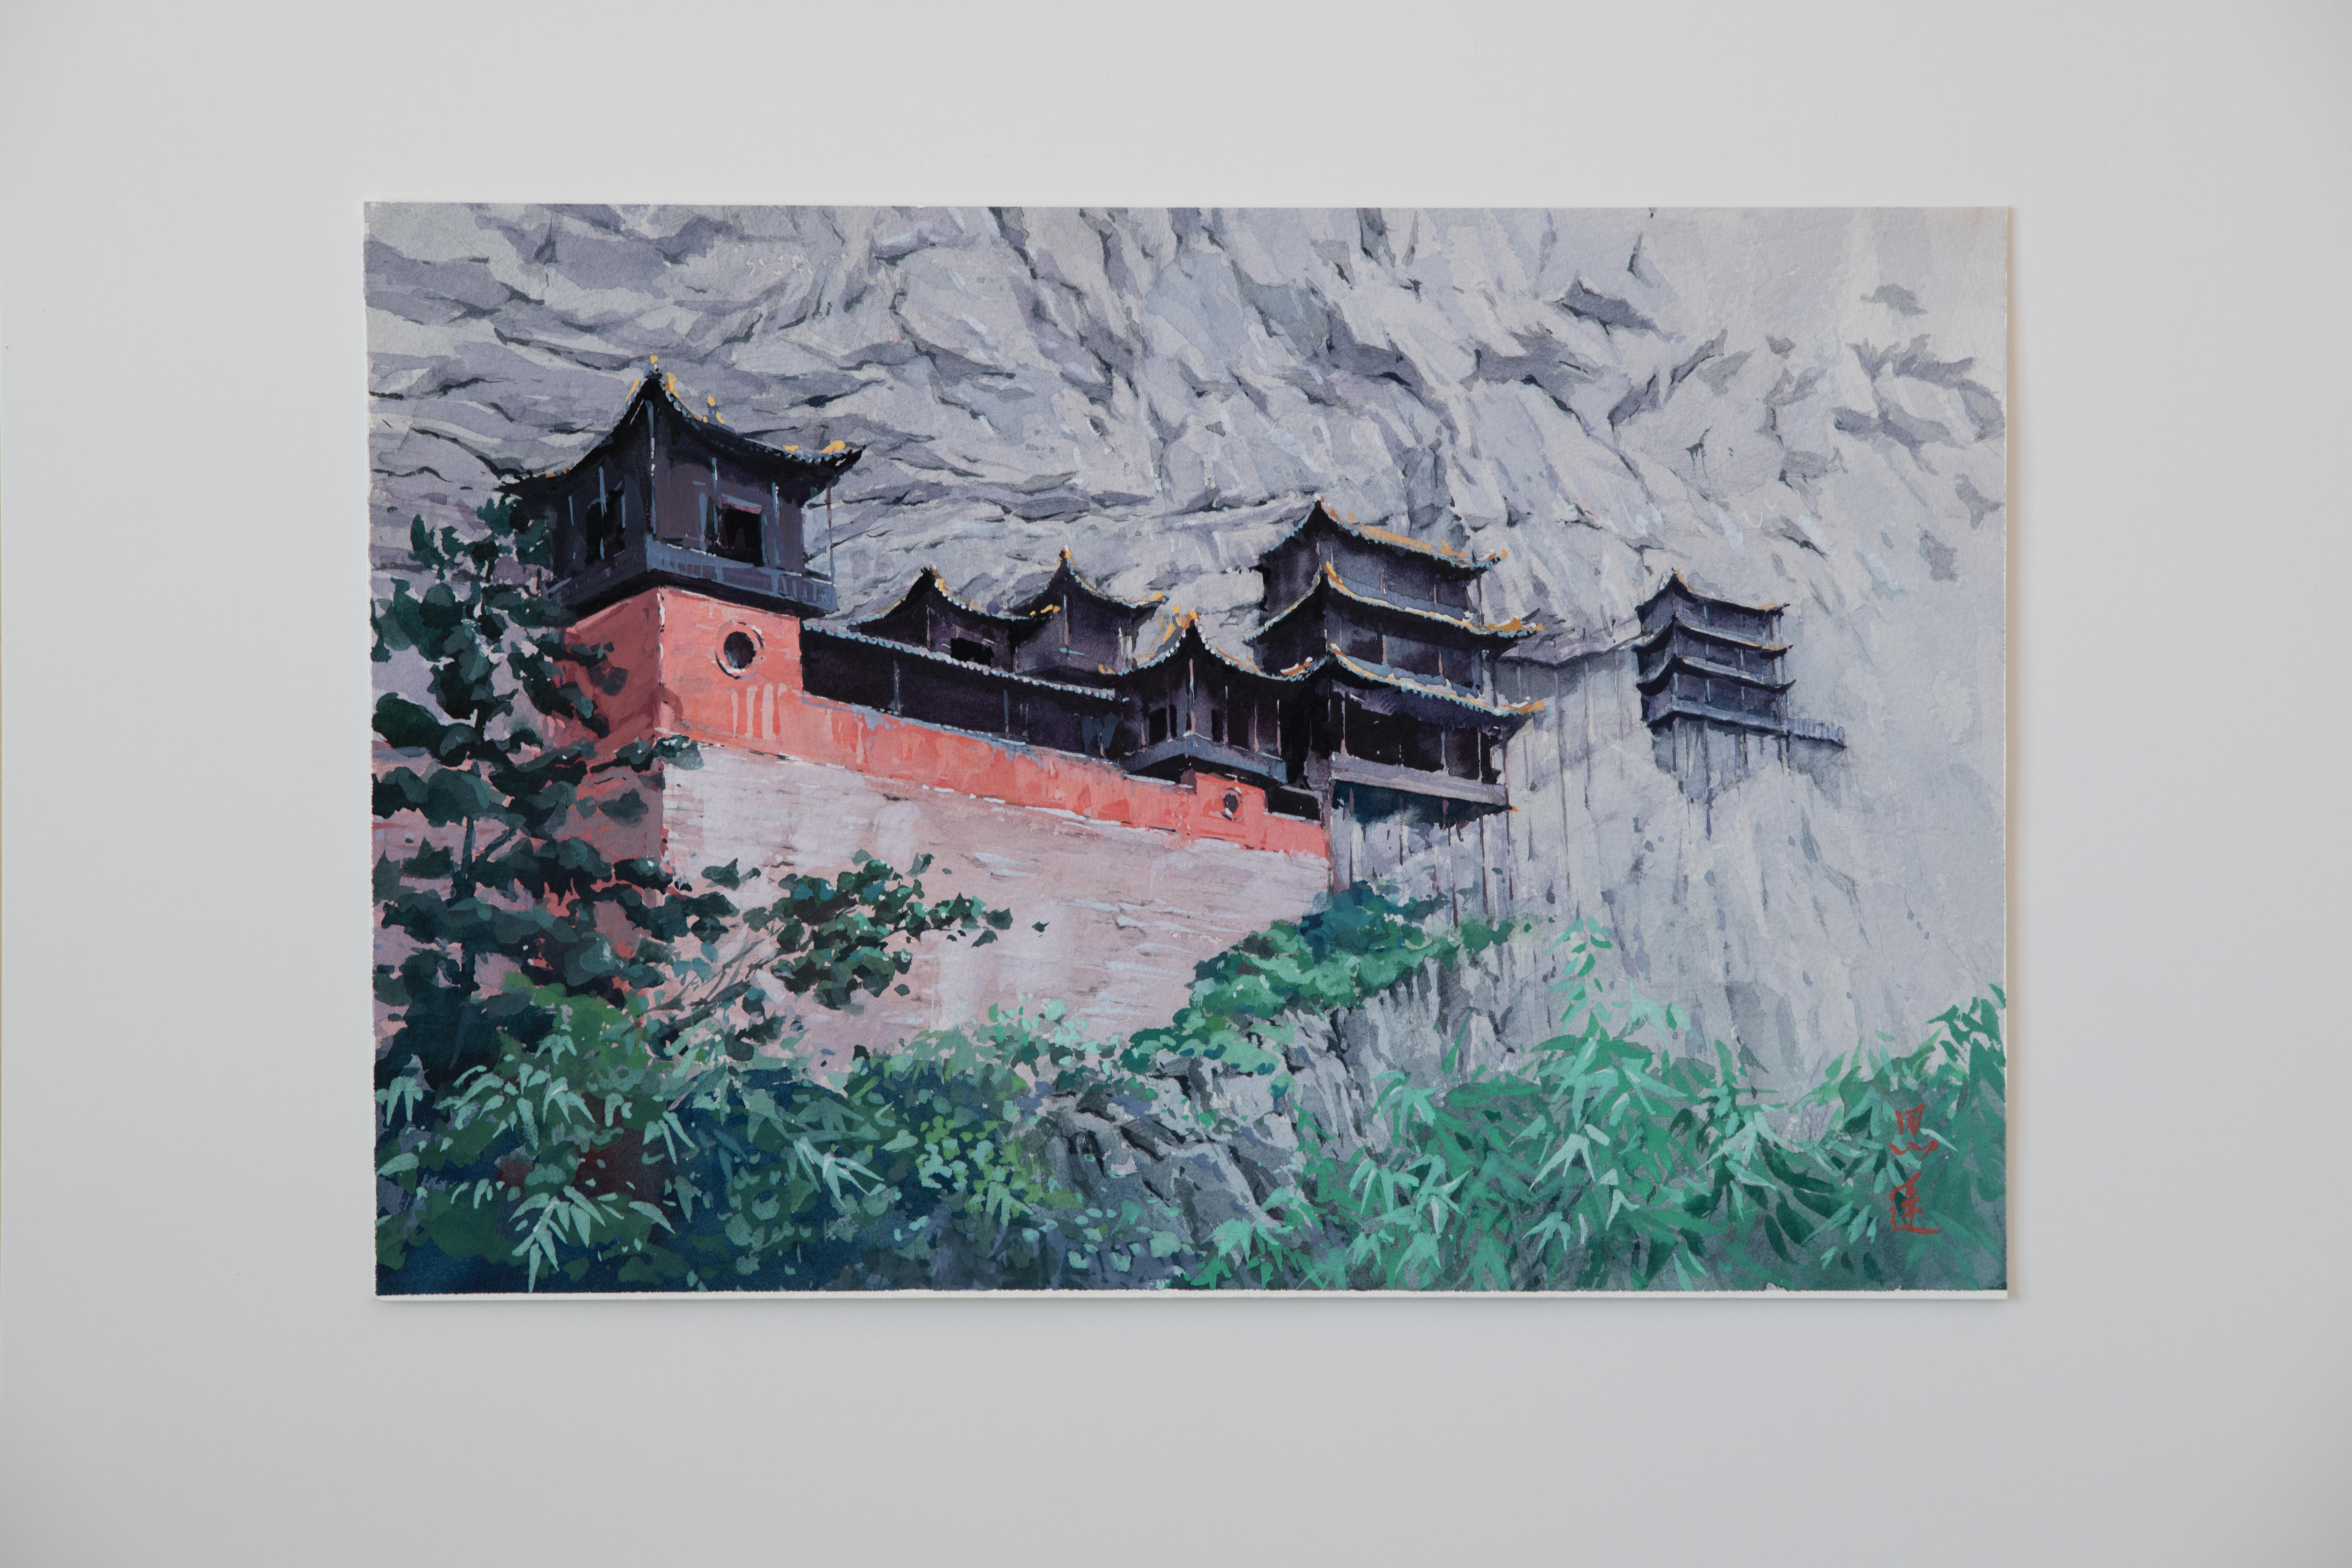 <p>Artist Comments<br>Artist Siyuan Ma shares a view of the Hanging Temple, a famous cultural landmark in China. Its Chinese name takes the character 